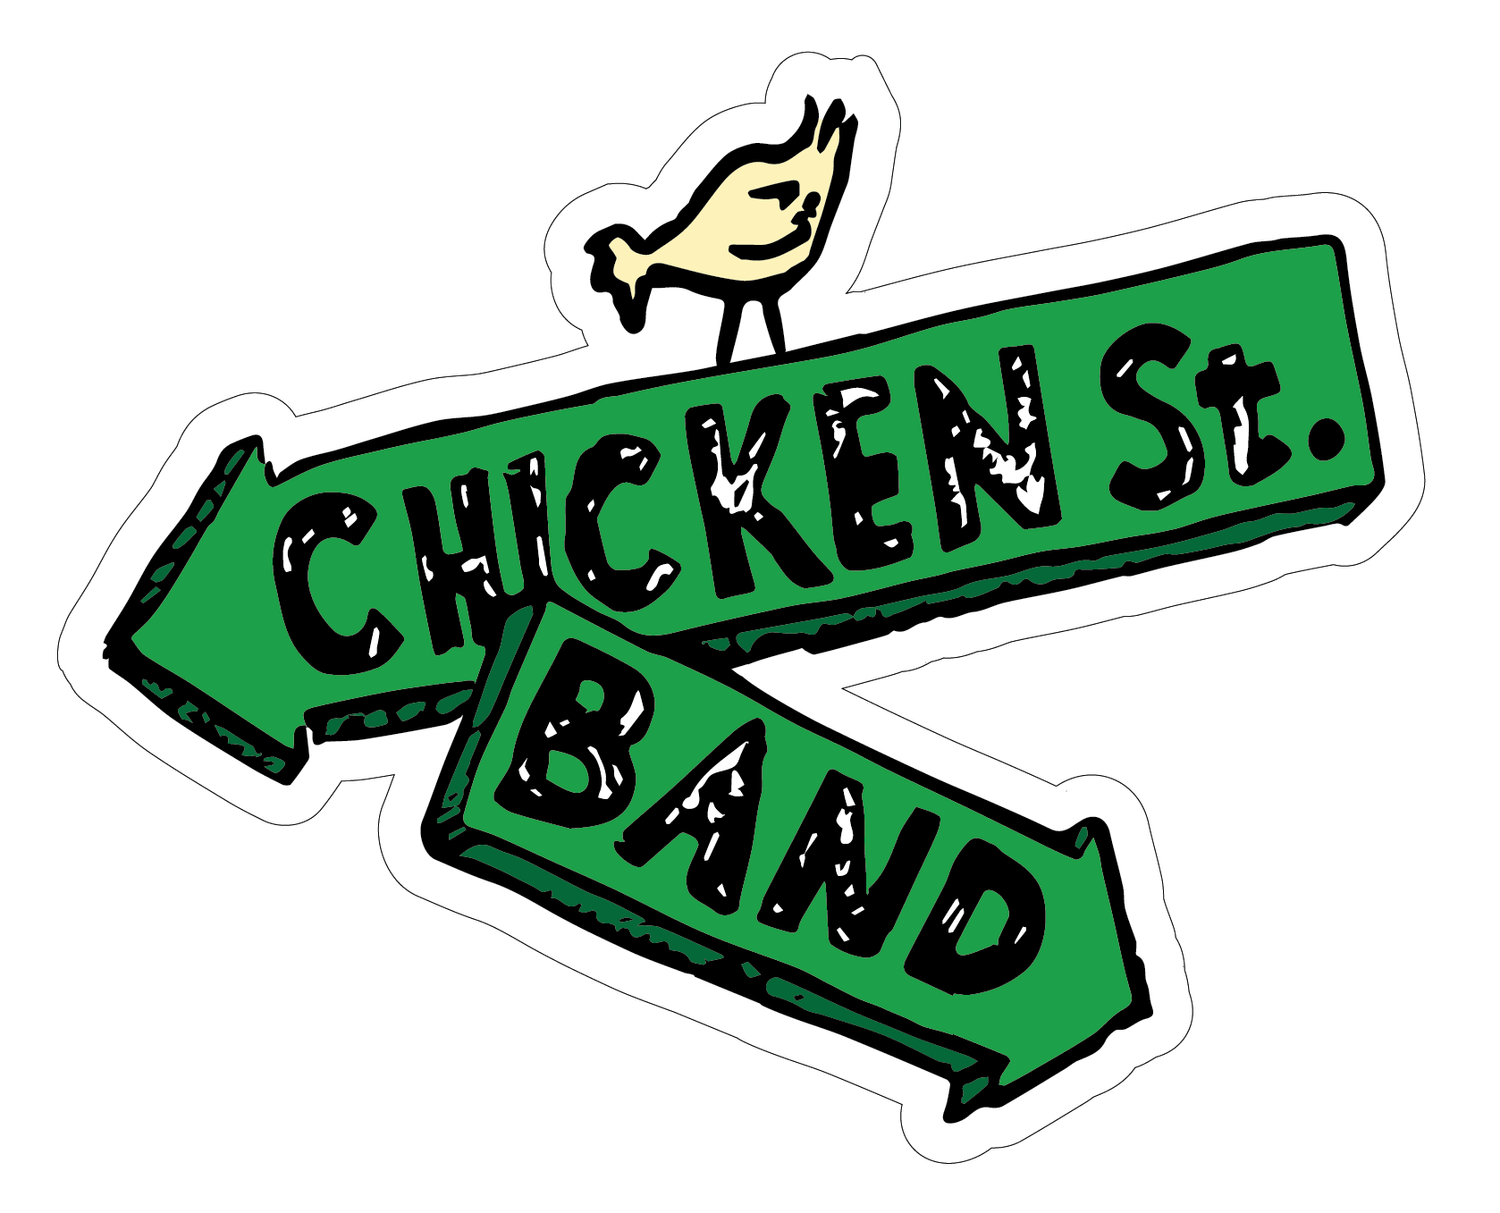 The Chicken Street Band